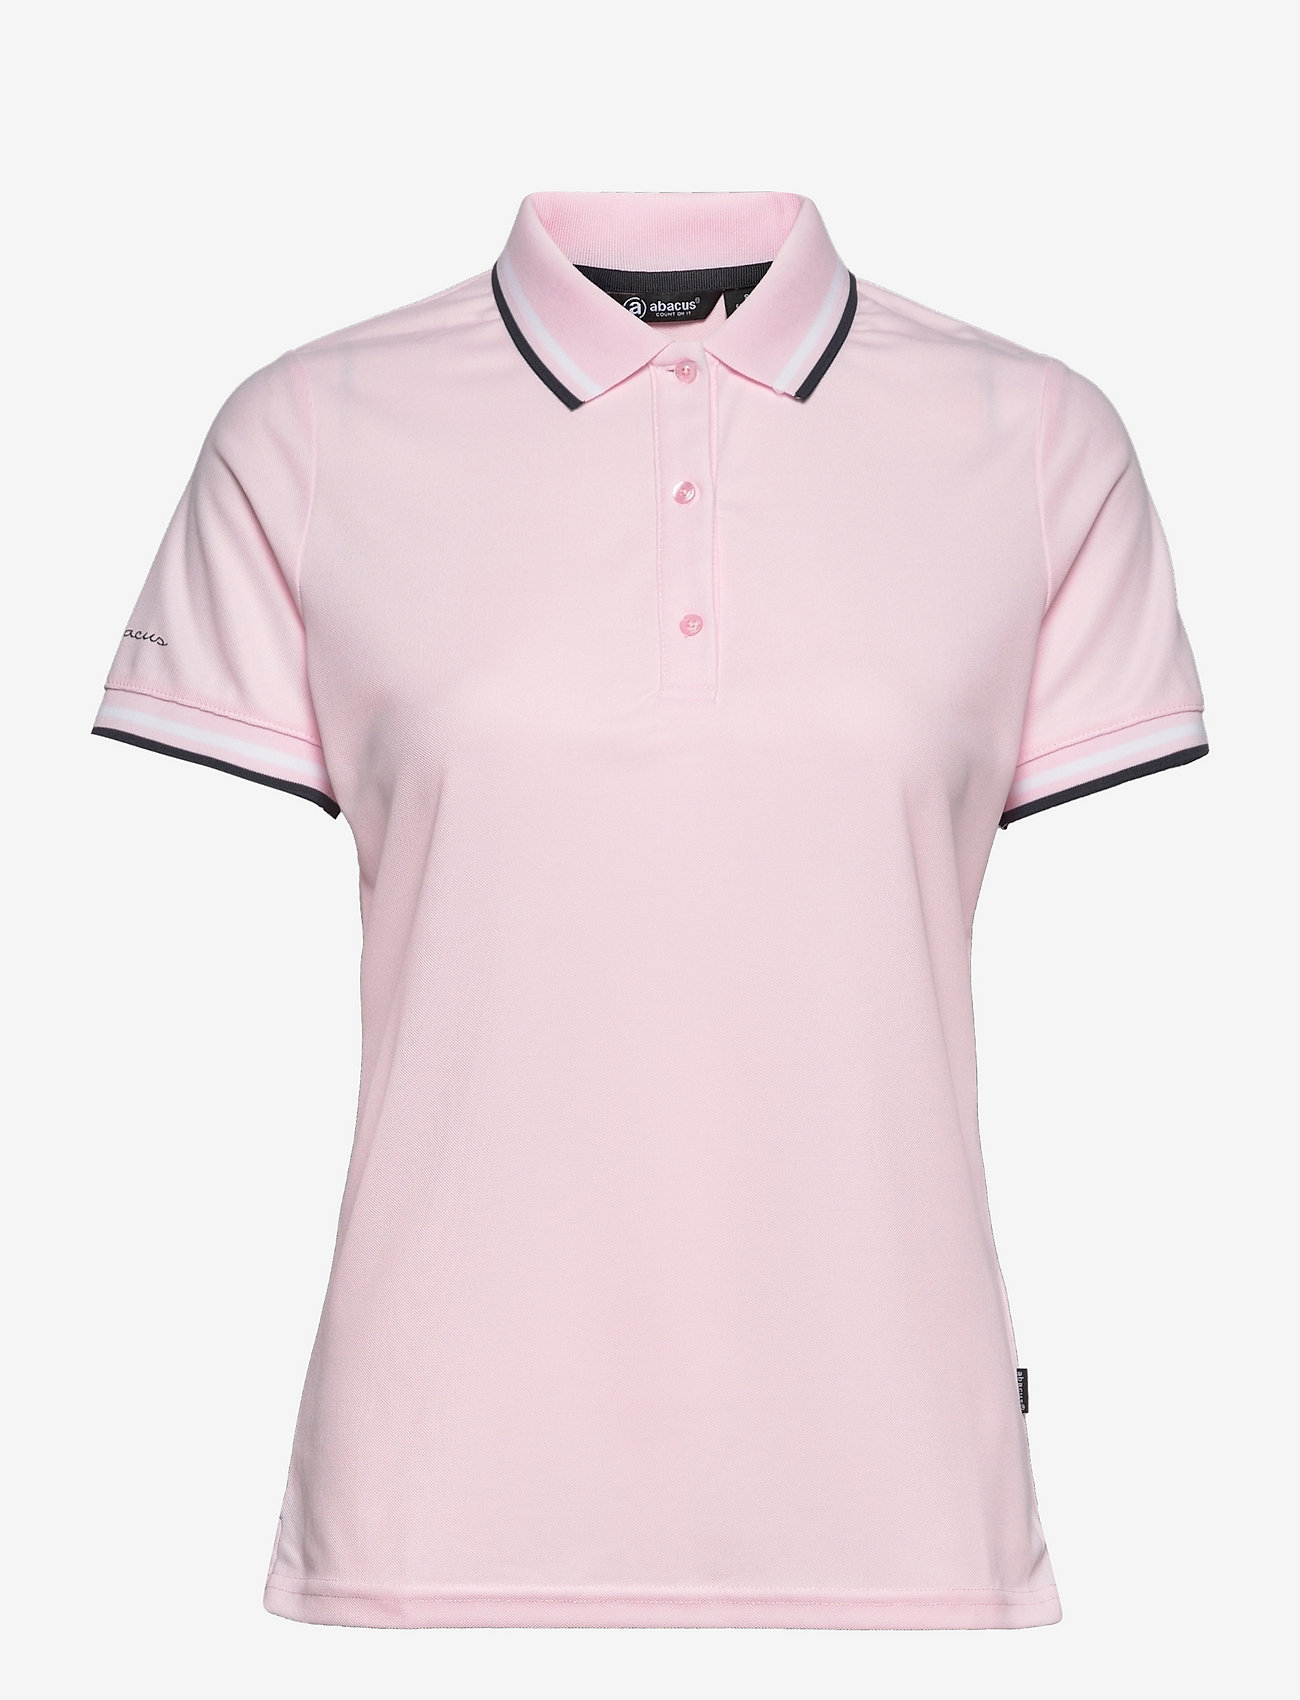 Abacus - Lds Pines polo - polos - lt.pink - 0